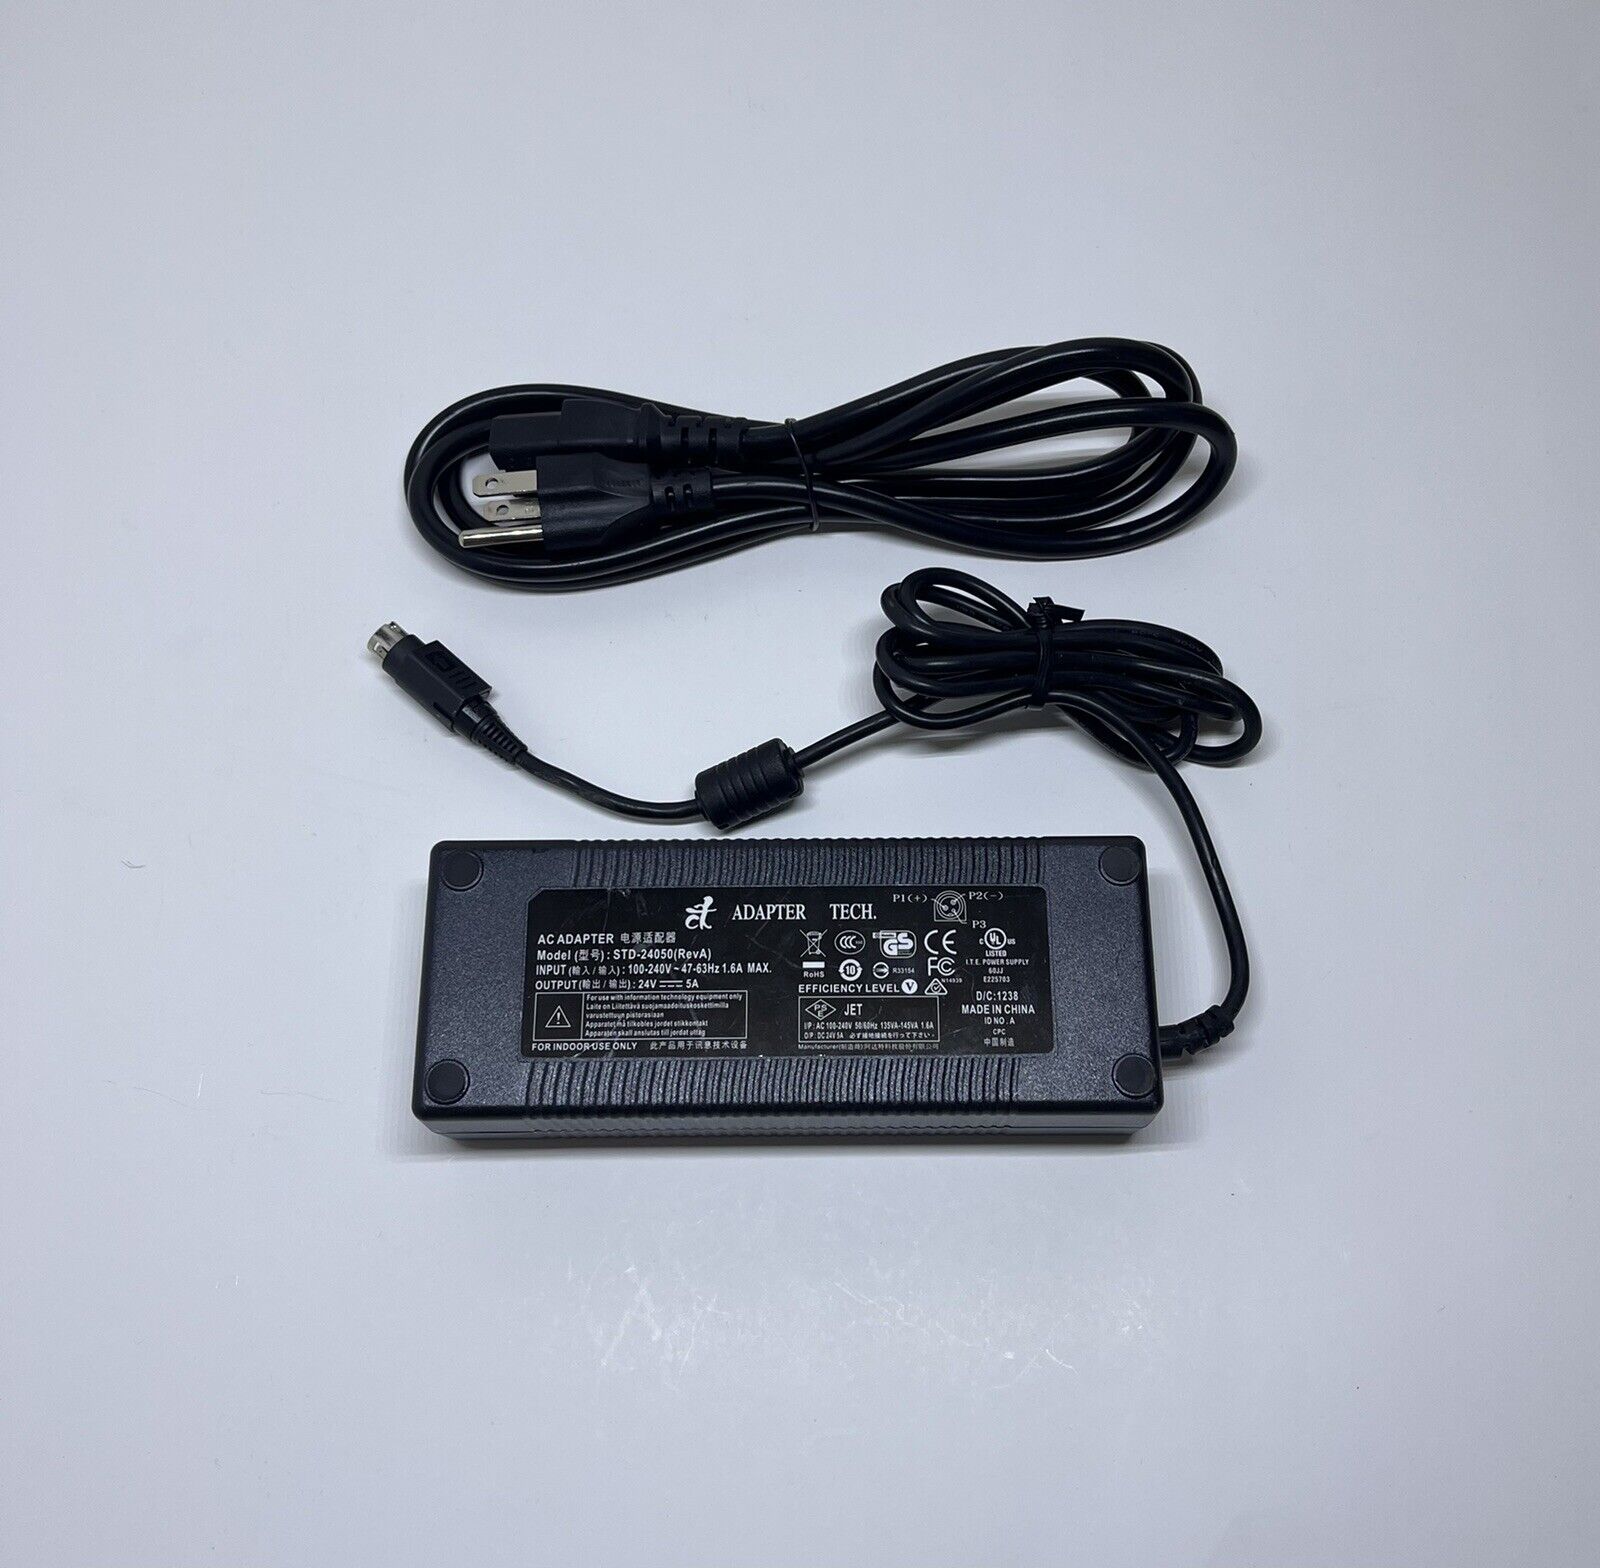 *Brand NEW* 24V 5A with Power Cord Adapter Tech STD-24050 AC Adapter / Power Supply